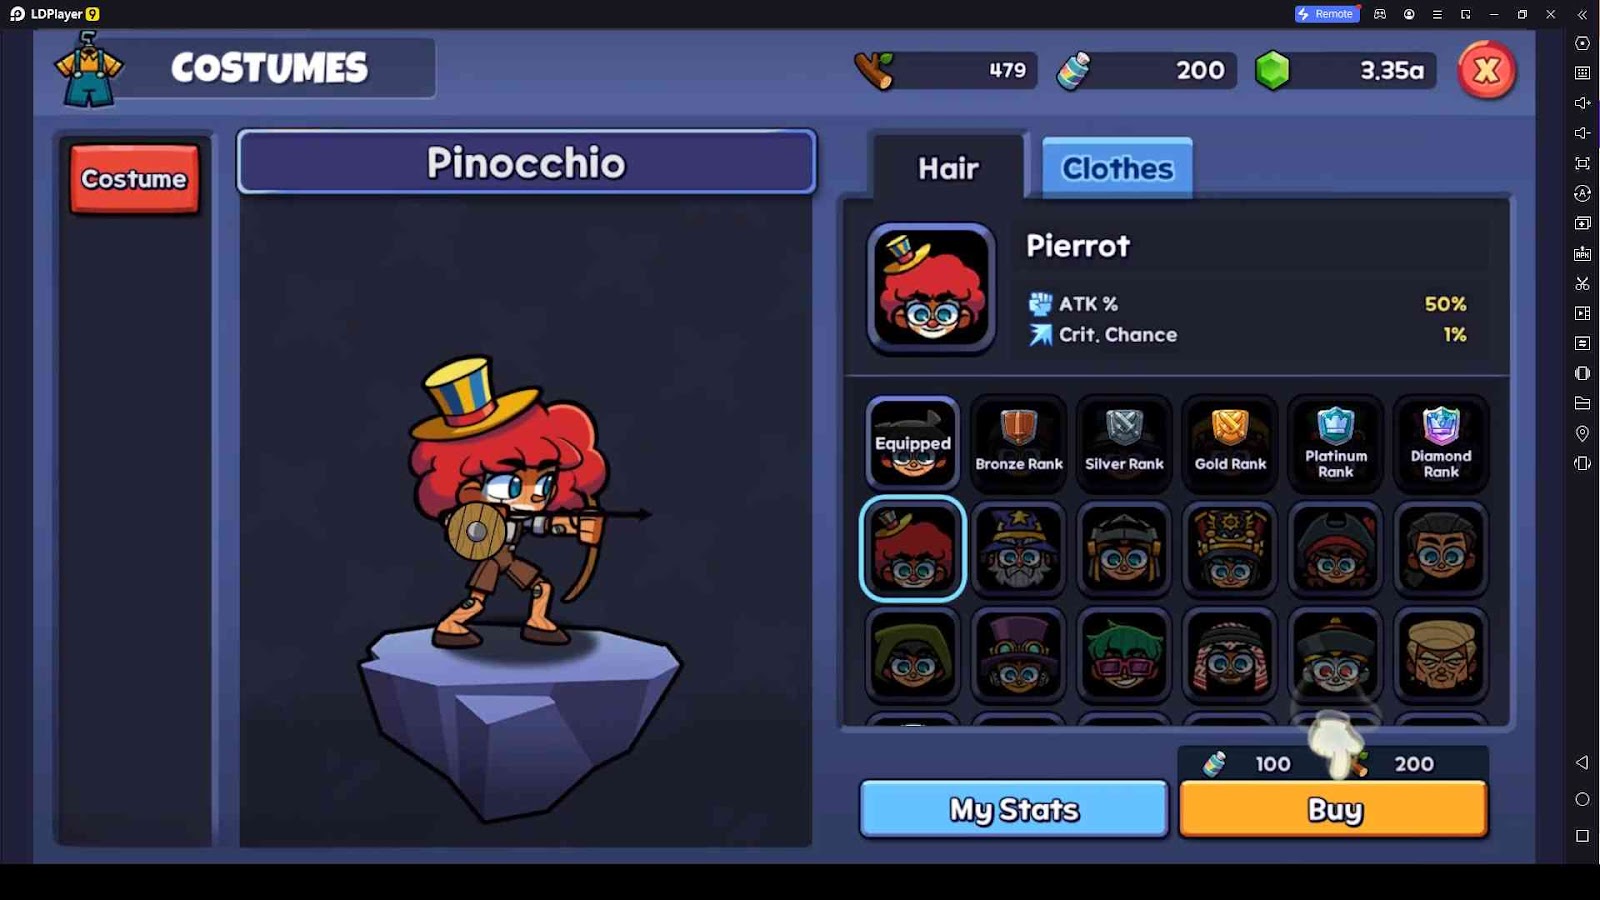 Purchase Costumes to Strengthen the Hero